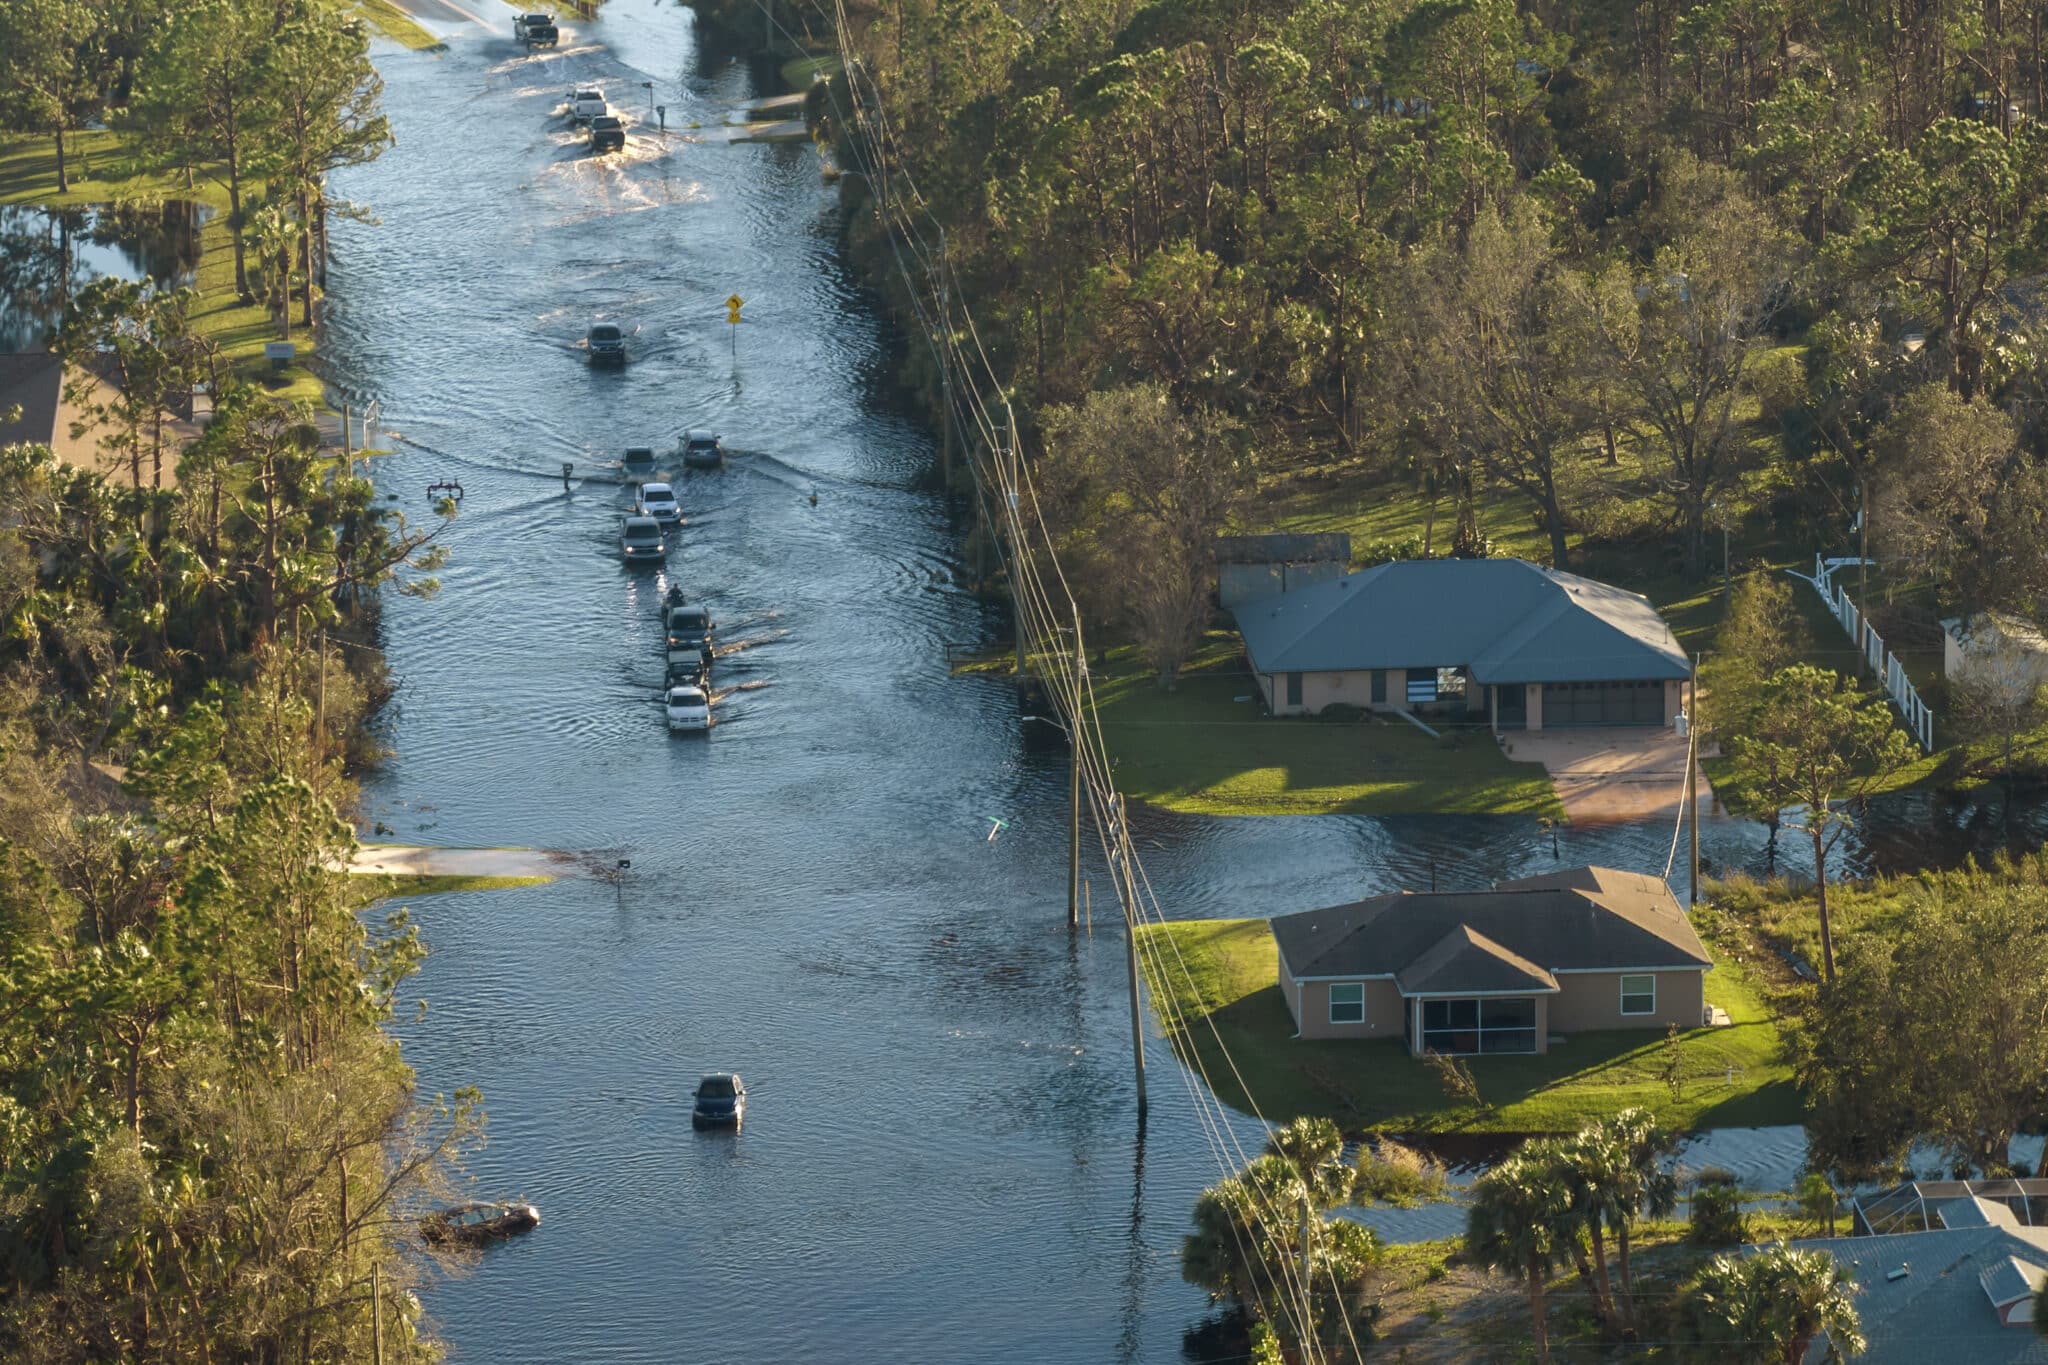 Hurricahe fainfall flooded Florida road with evacuating cars and surrounded with water houses in suburban residential area.